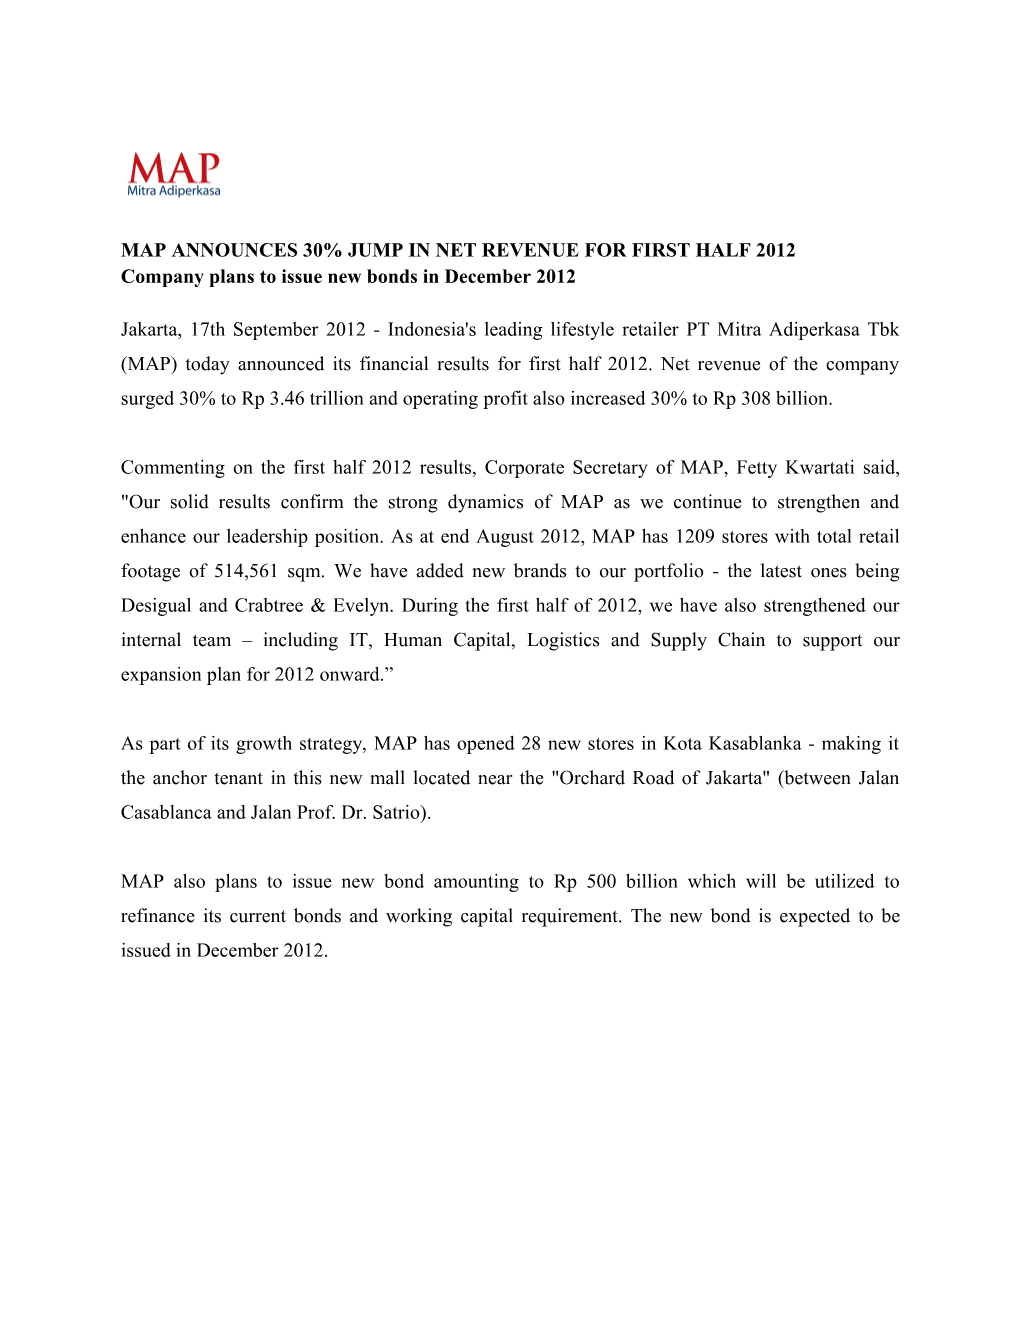 Map Announces 30% Jump in Net Revenue for First Half 2012